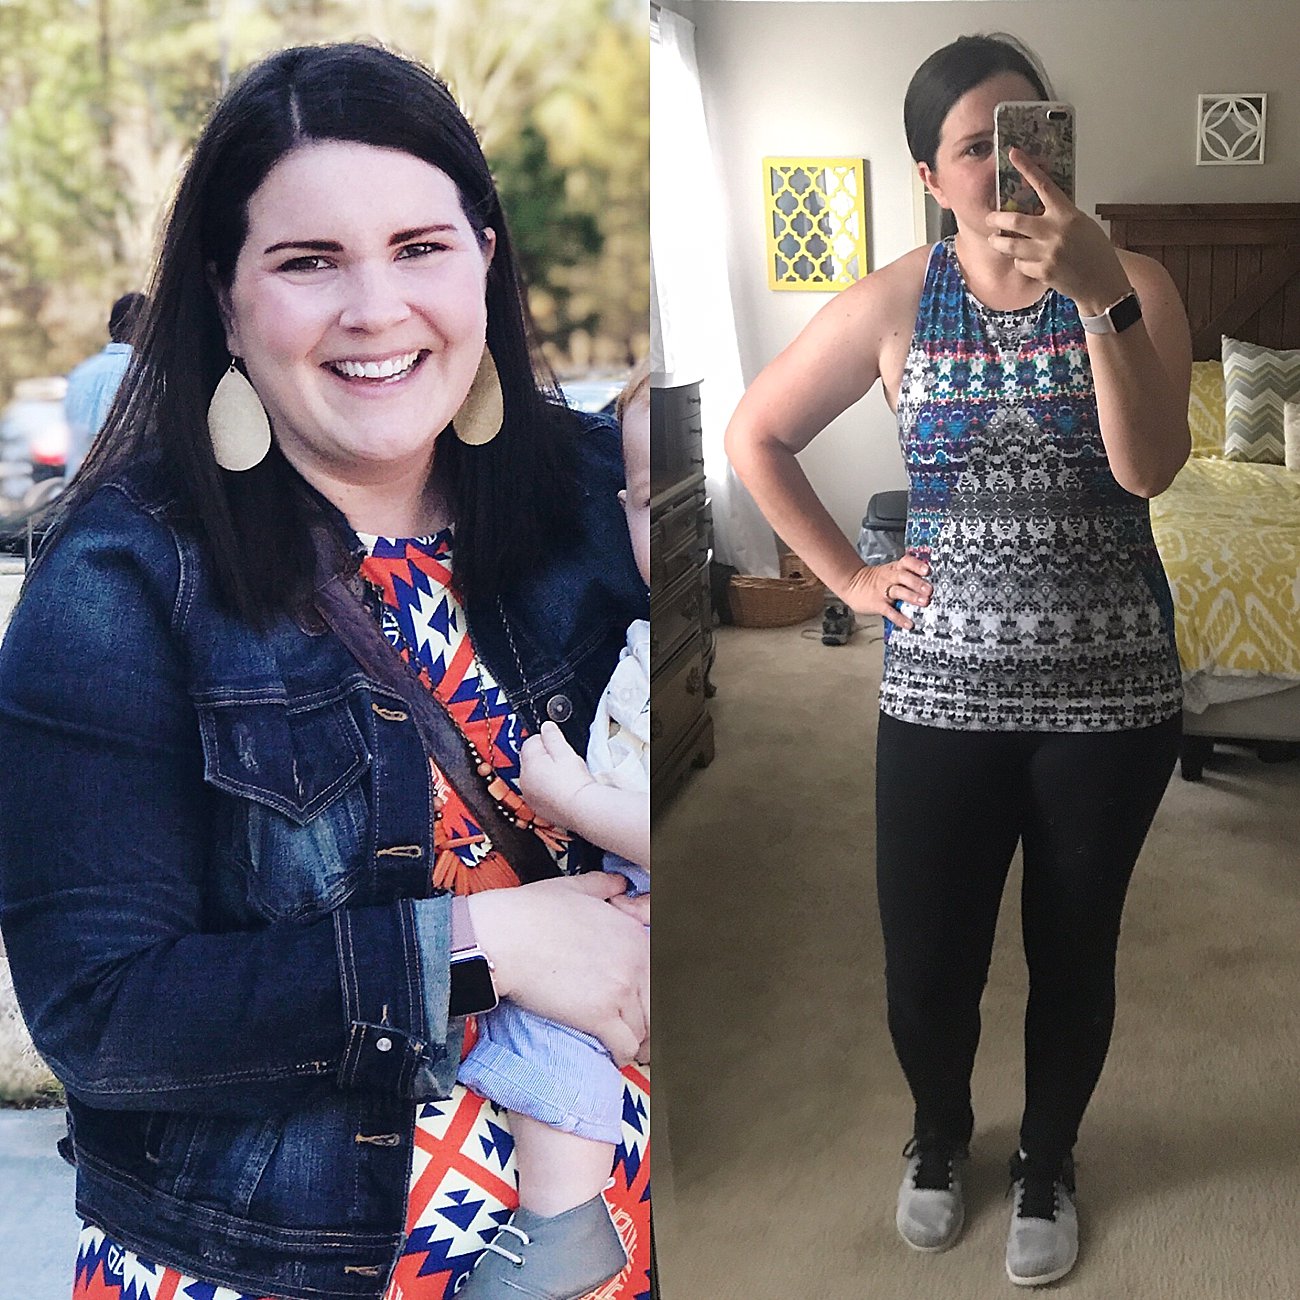 Why I Don't Want to Lose Weight - What my realistic fitness goals look like - Burn Bootcamp Review (1) - My Fitness Journey - When the Going Gets Tough by popular North Carolina blogger Still Being Molly